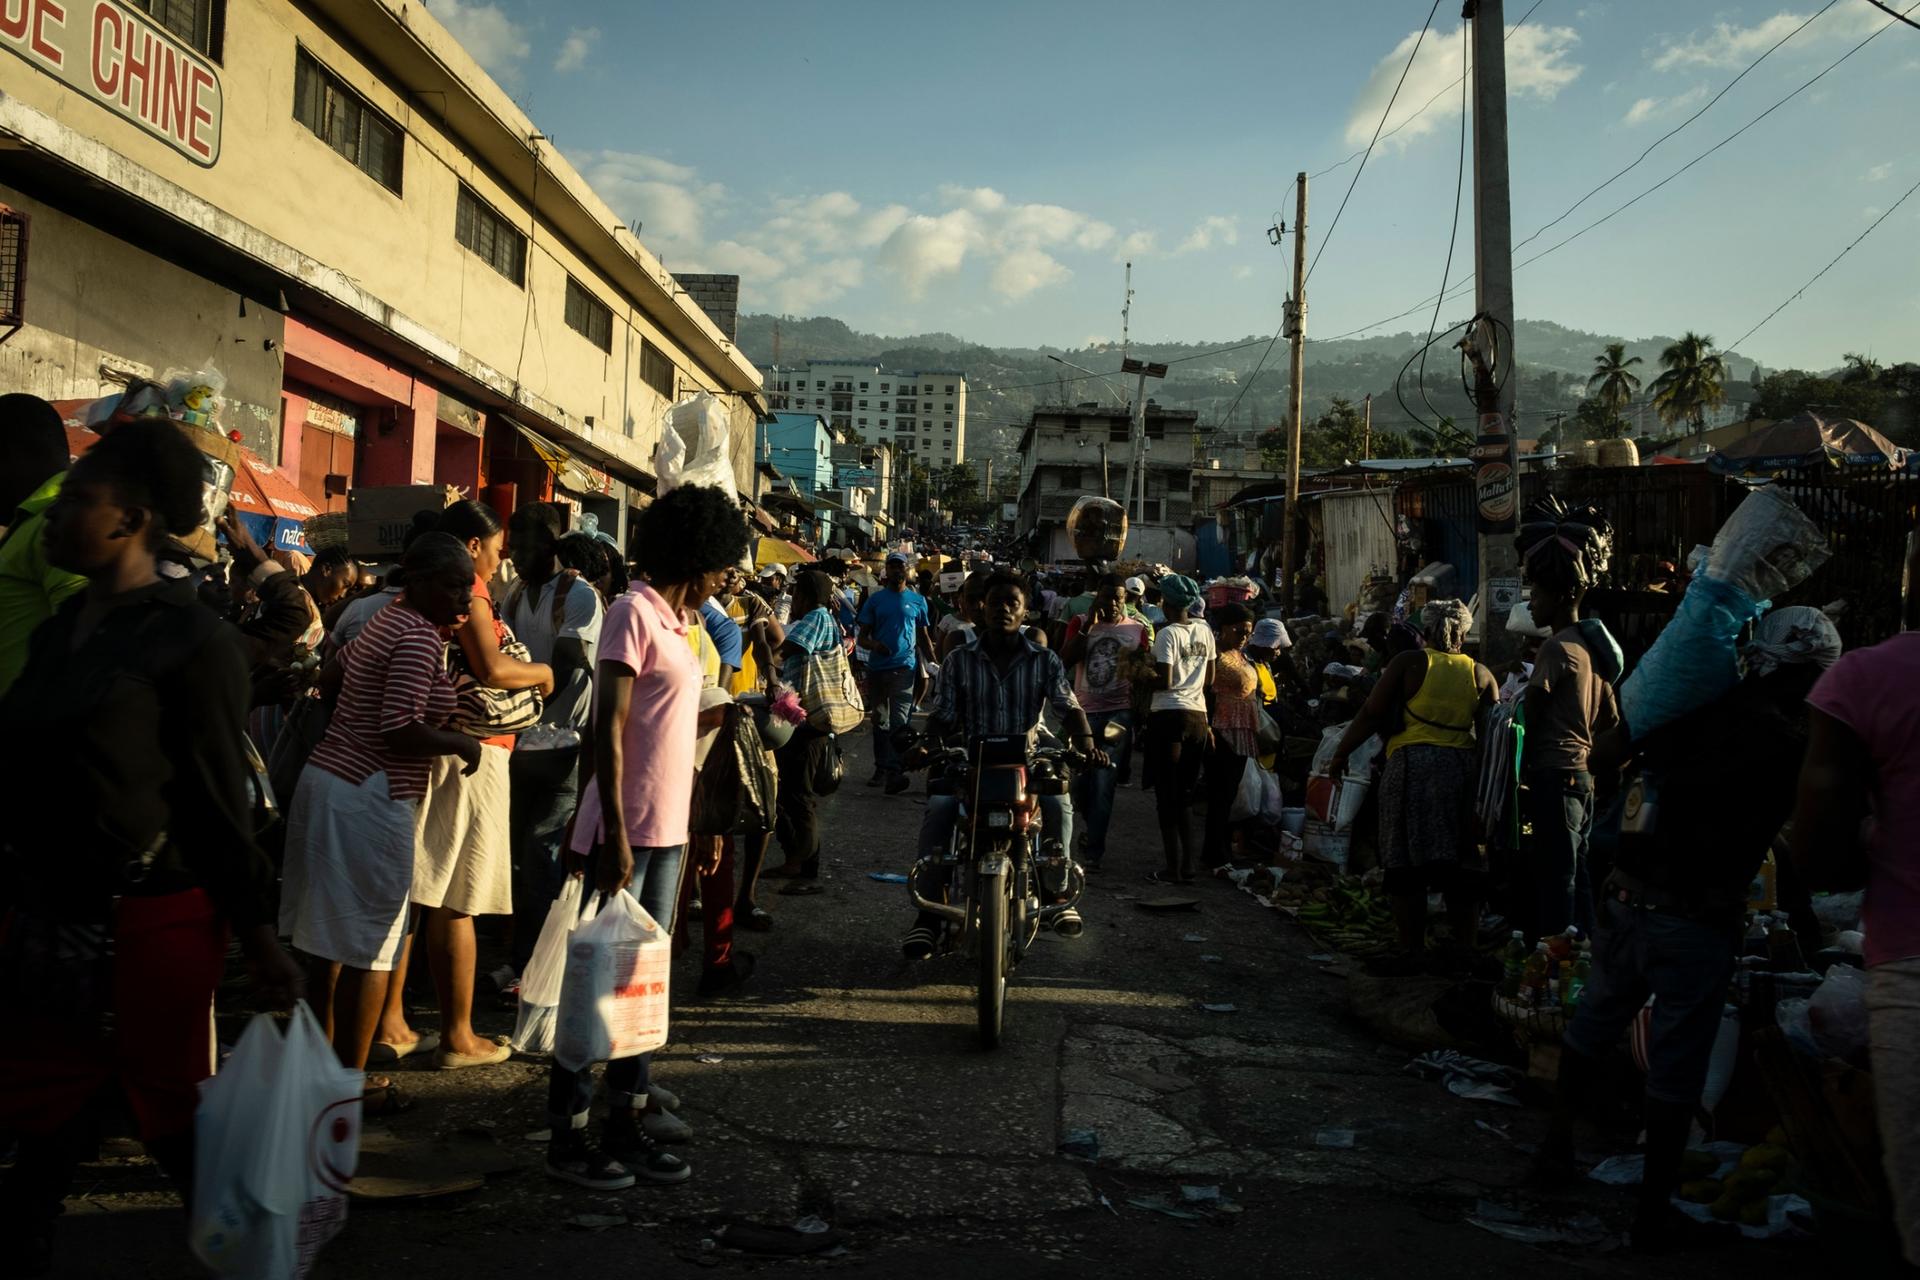 A crowd of people are shown at a Haitian market in Port-au-Prince with a person on a motorcycle in the middle.